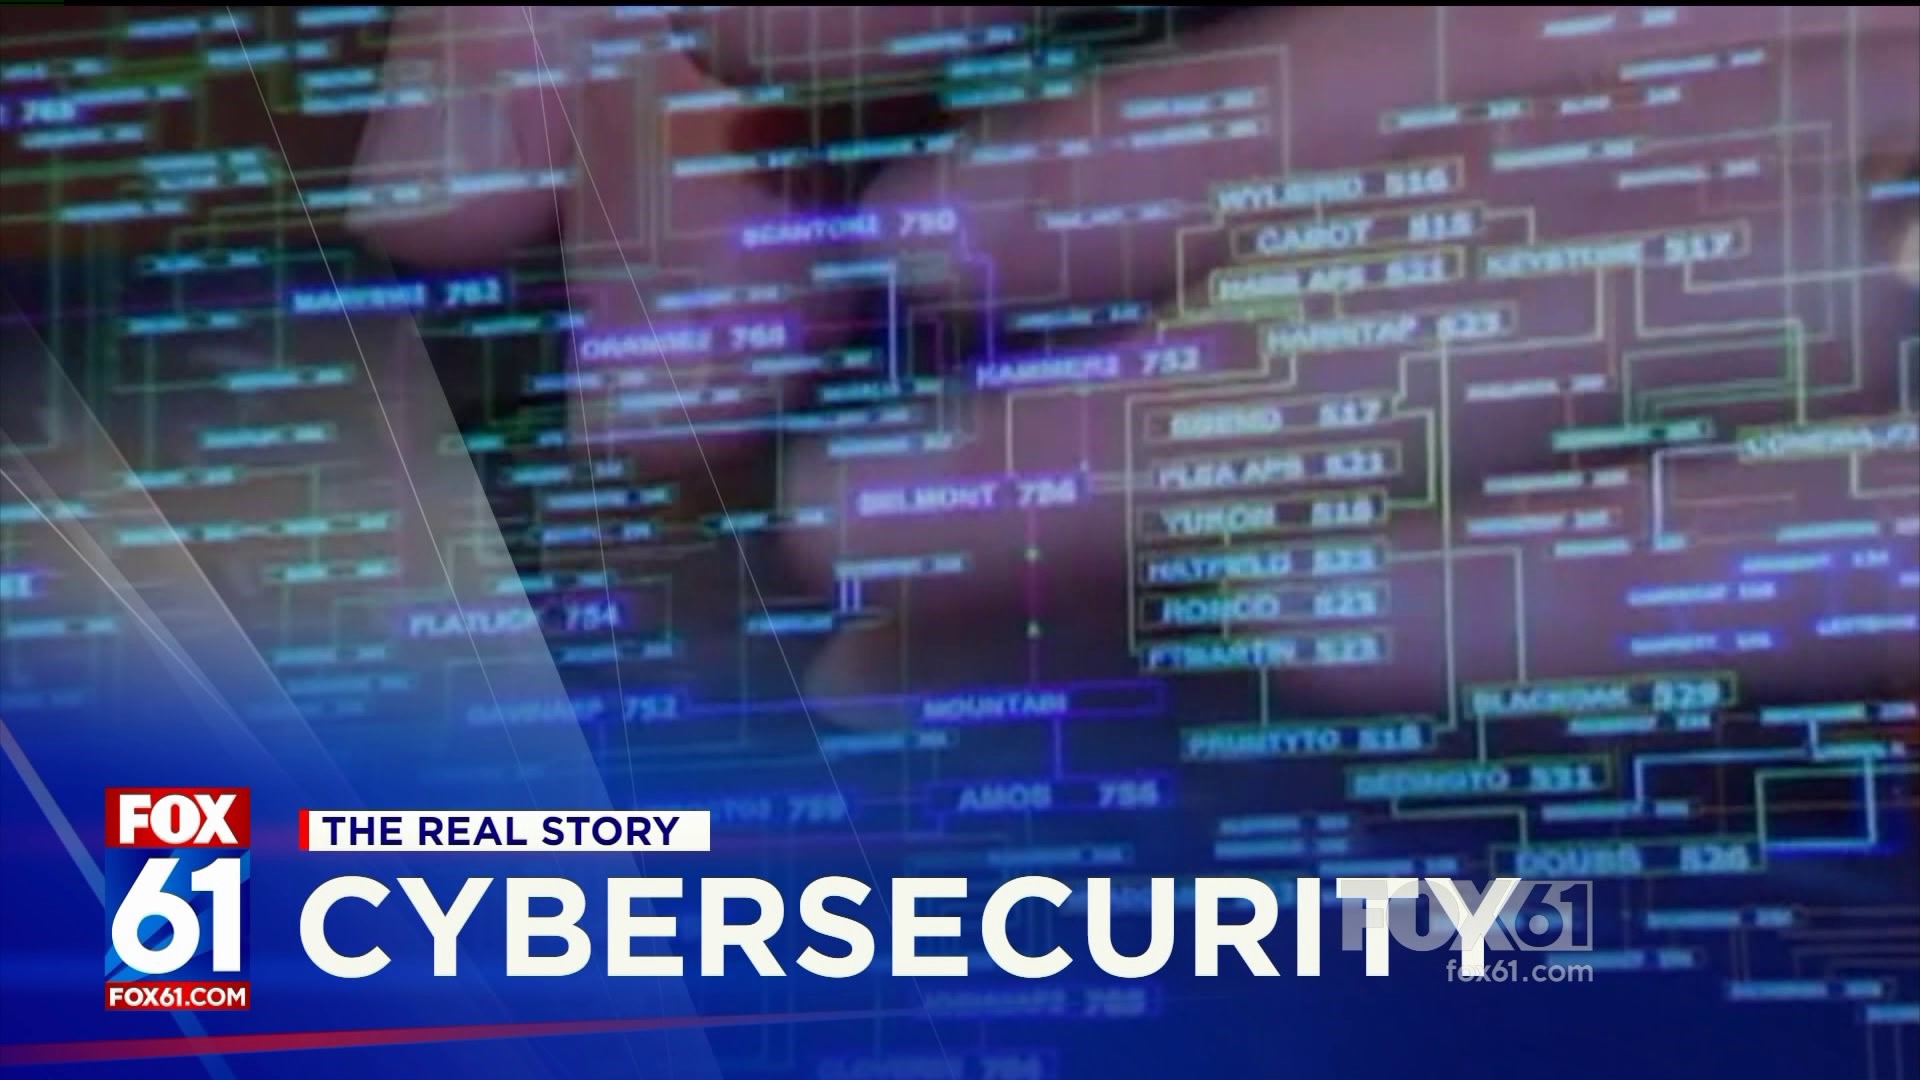 The Real Story - Cybersecurity